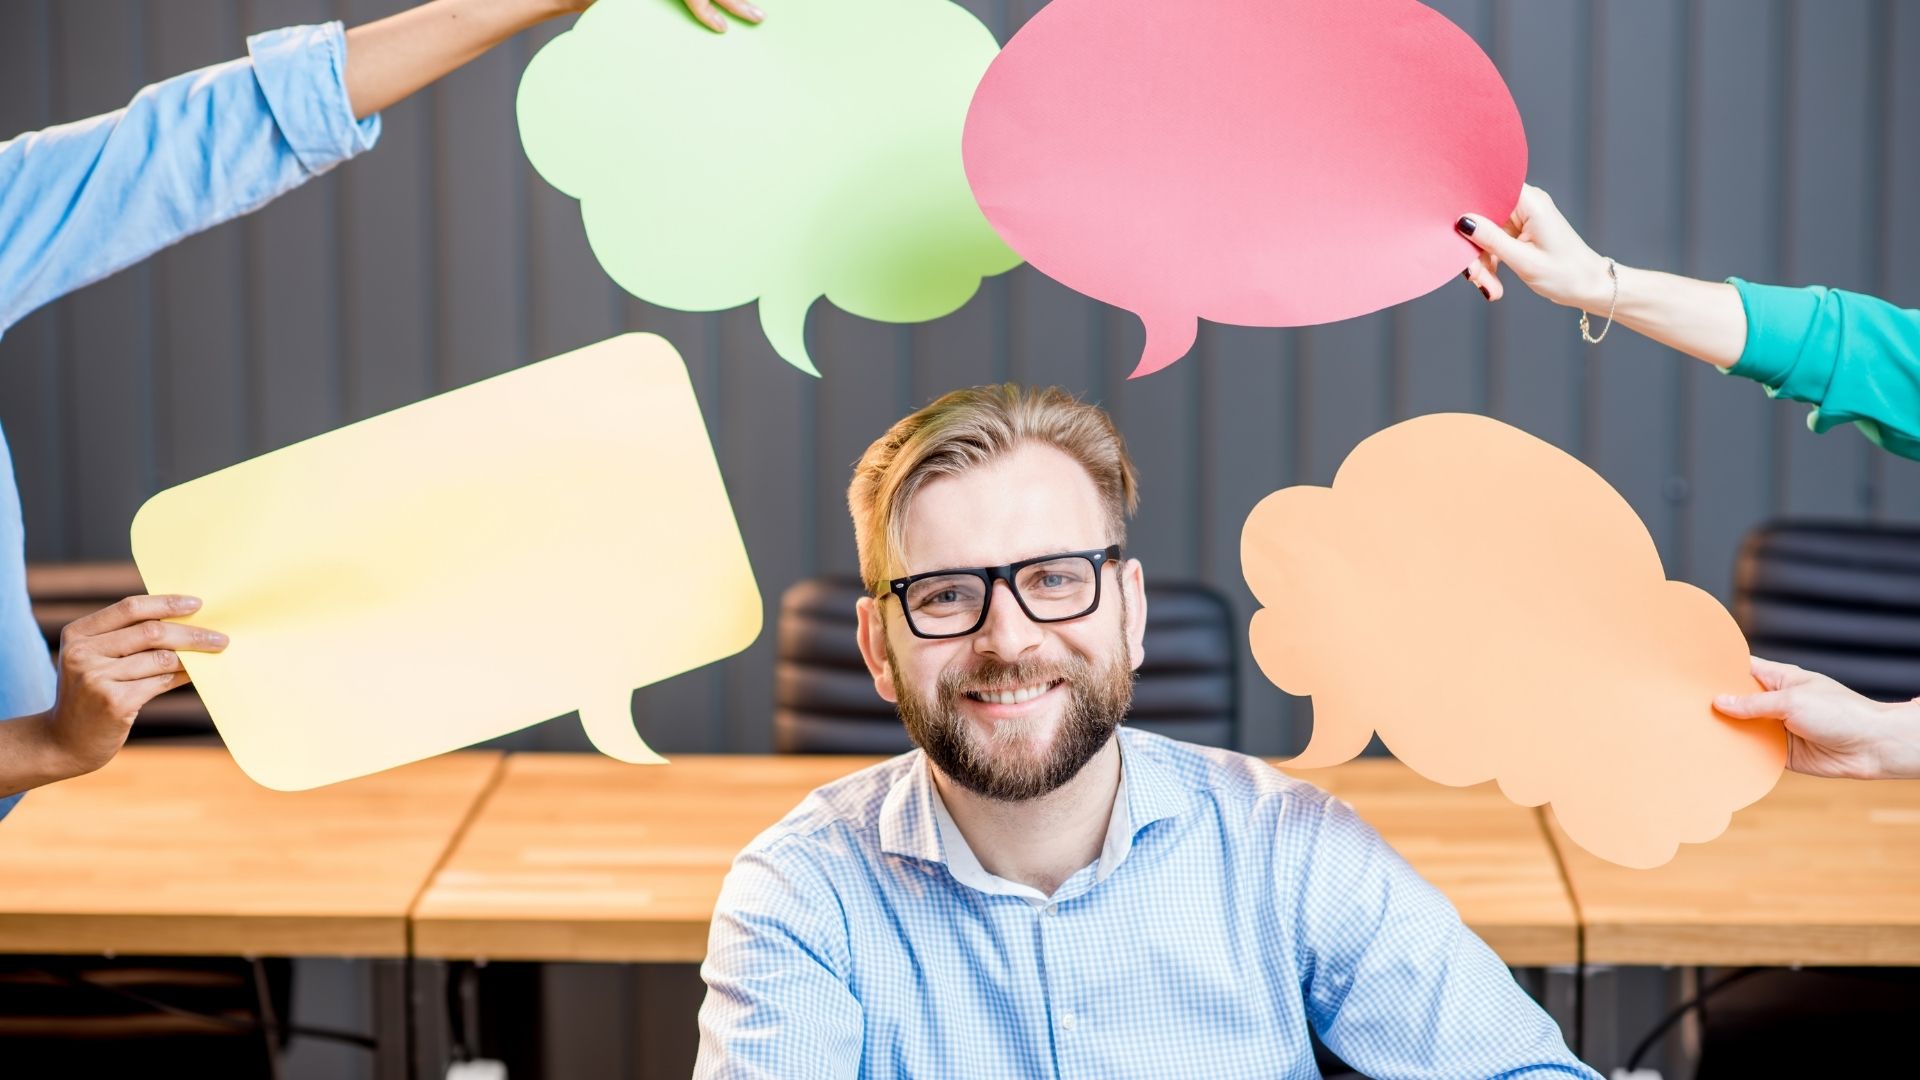 Man smiling surrounded by speech bubbles